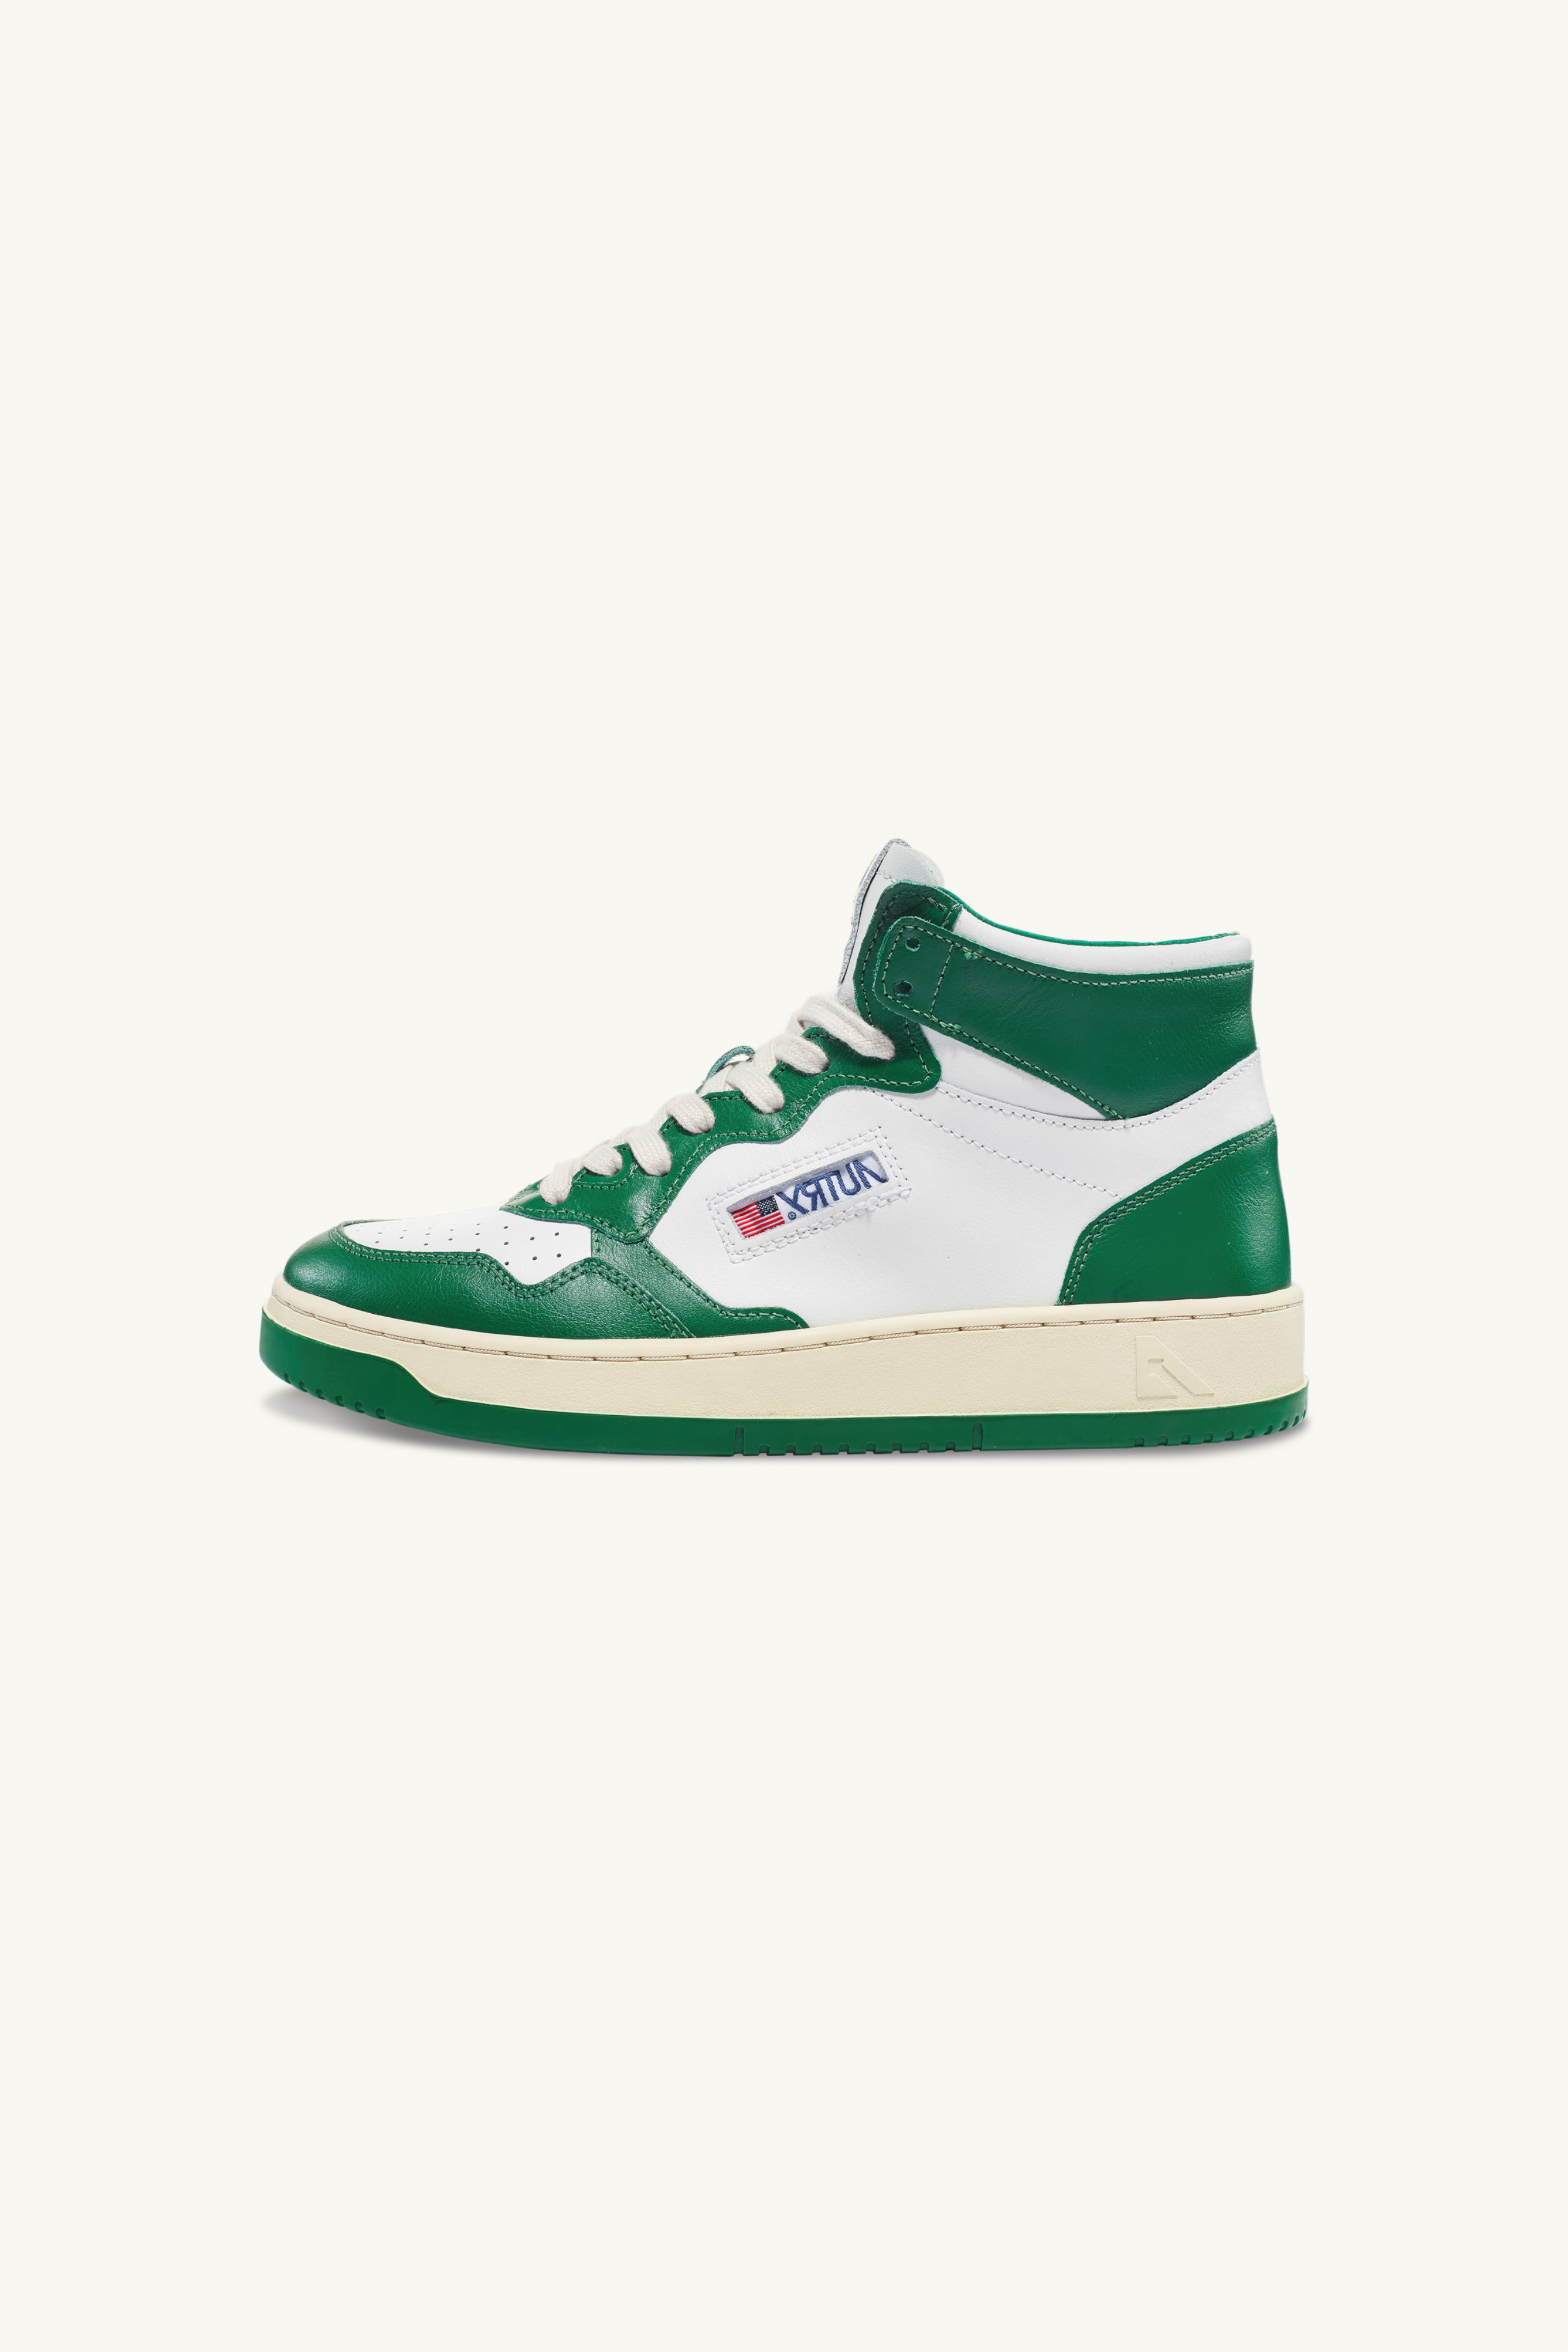 AUMW-WB03 - MEDALIST MID SNEAKERS IN TWO-TONE LEATHER COLOR WHITE AND GREEN